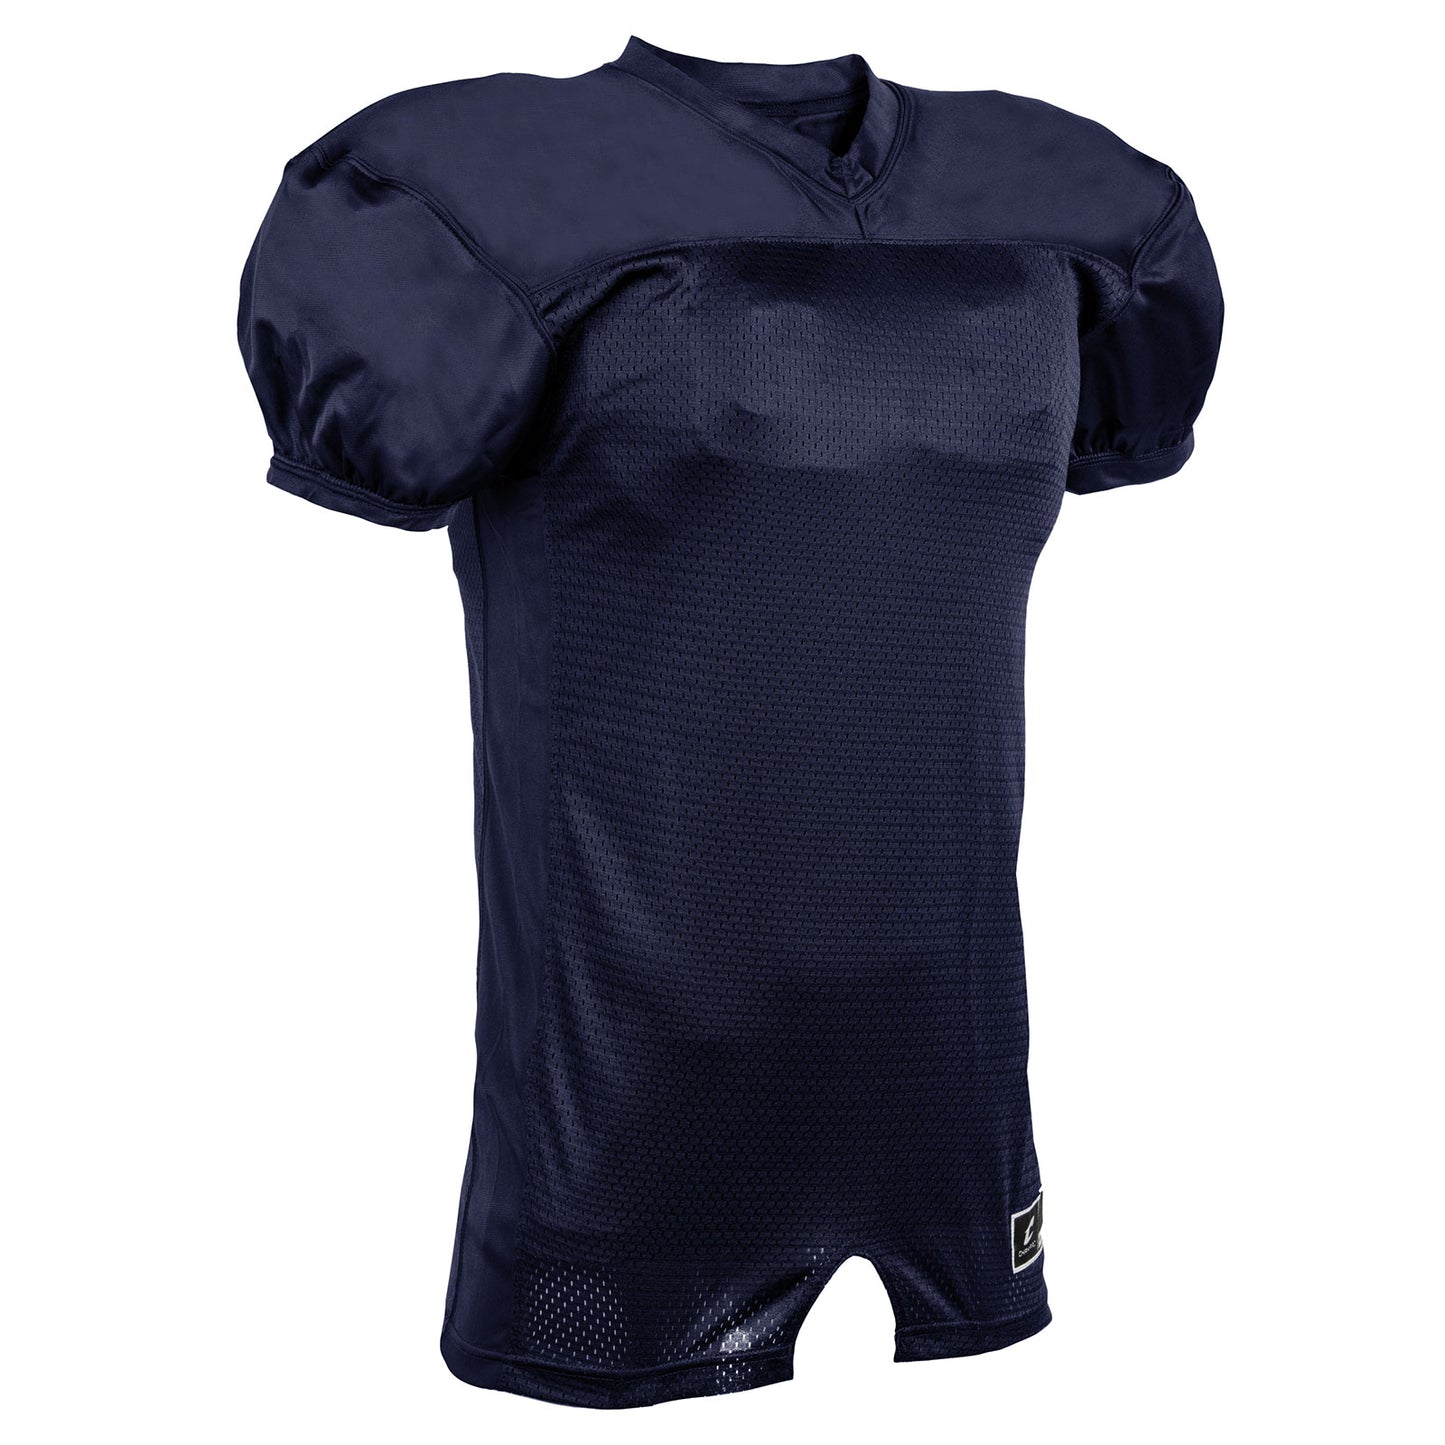 Pro Game Stretch Mesh Solid Football Jersey NAVY BODY